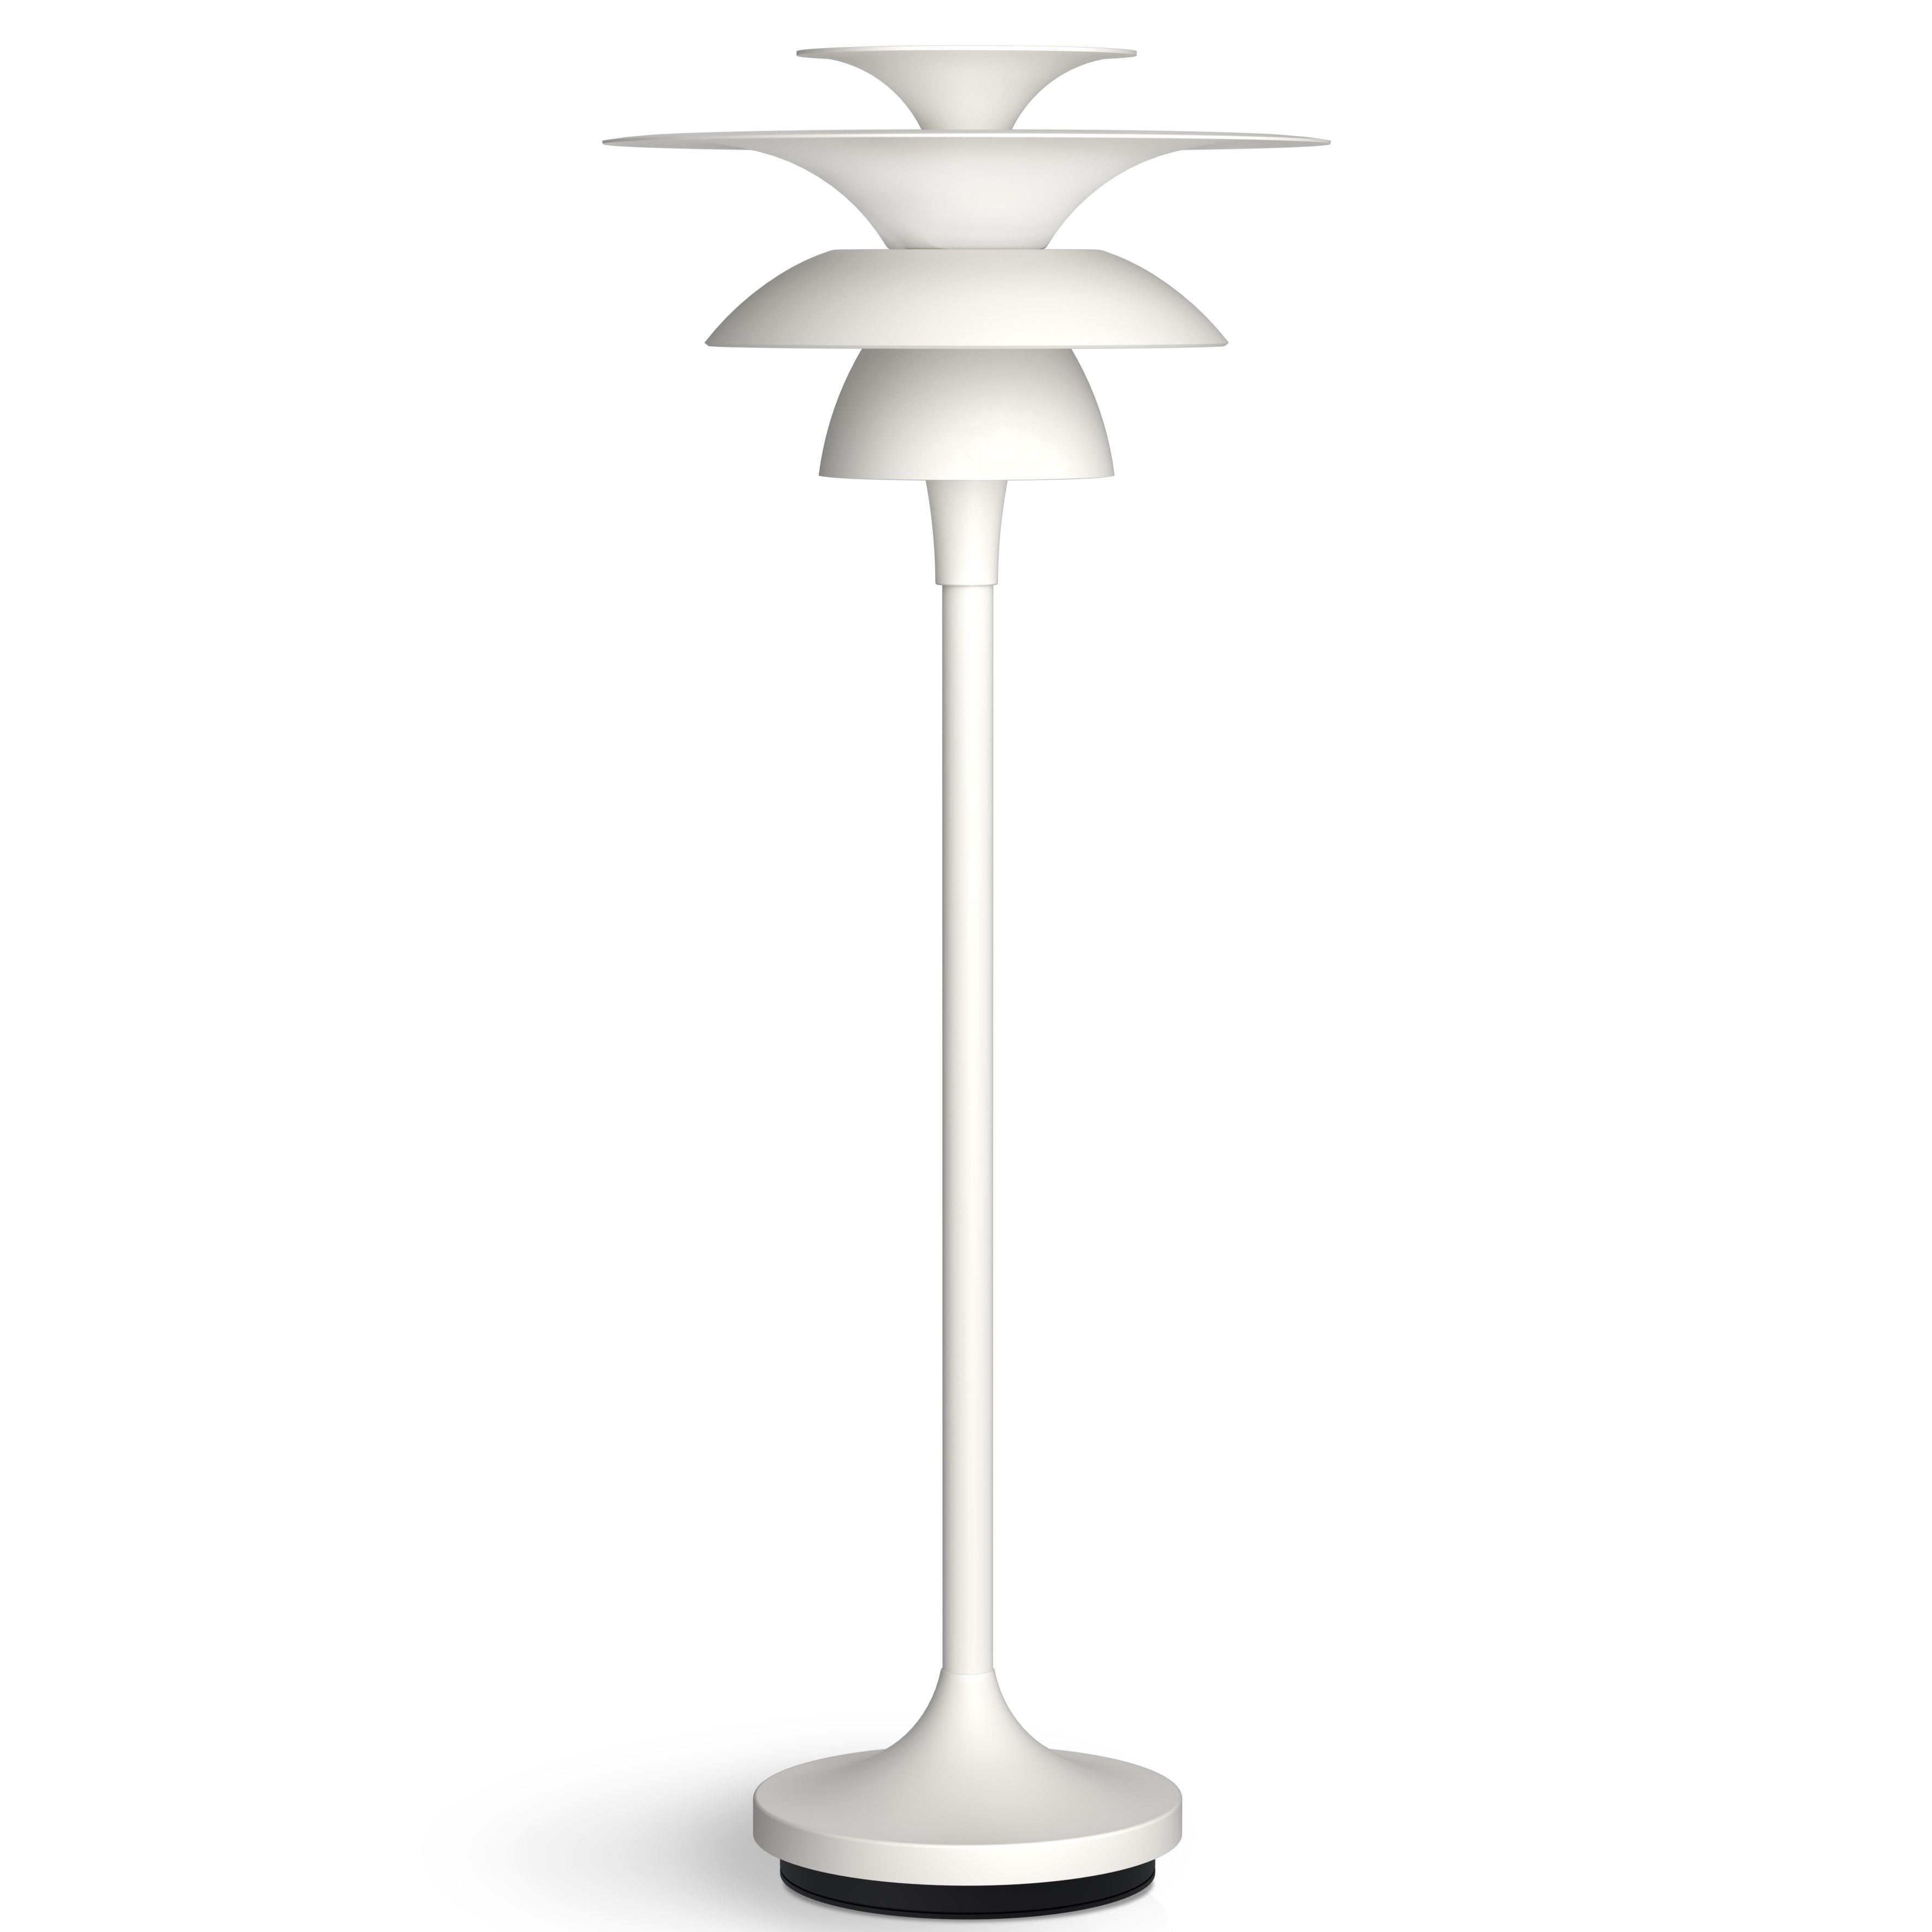 PICASSO H460 table lamp